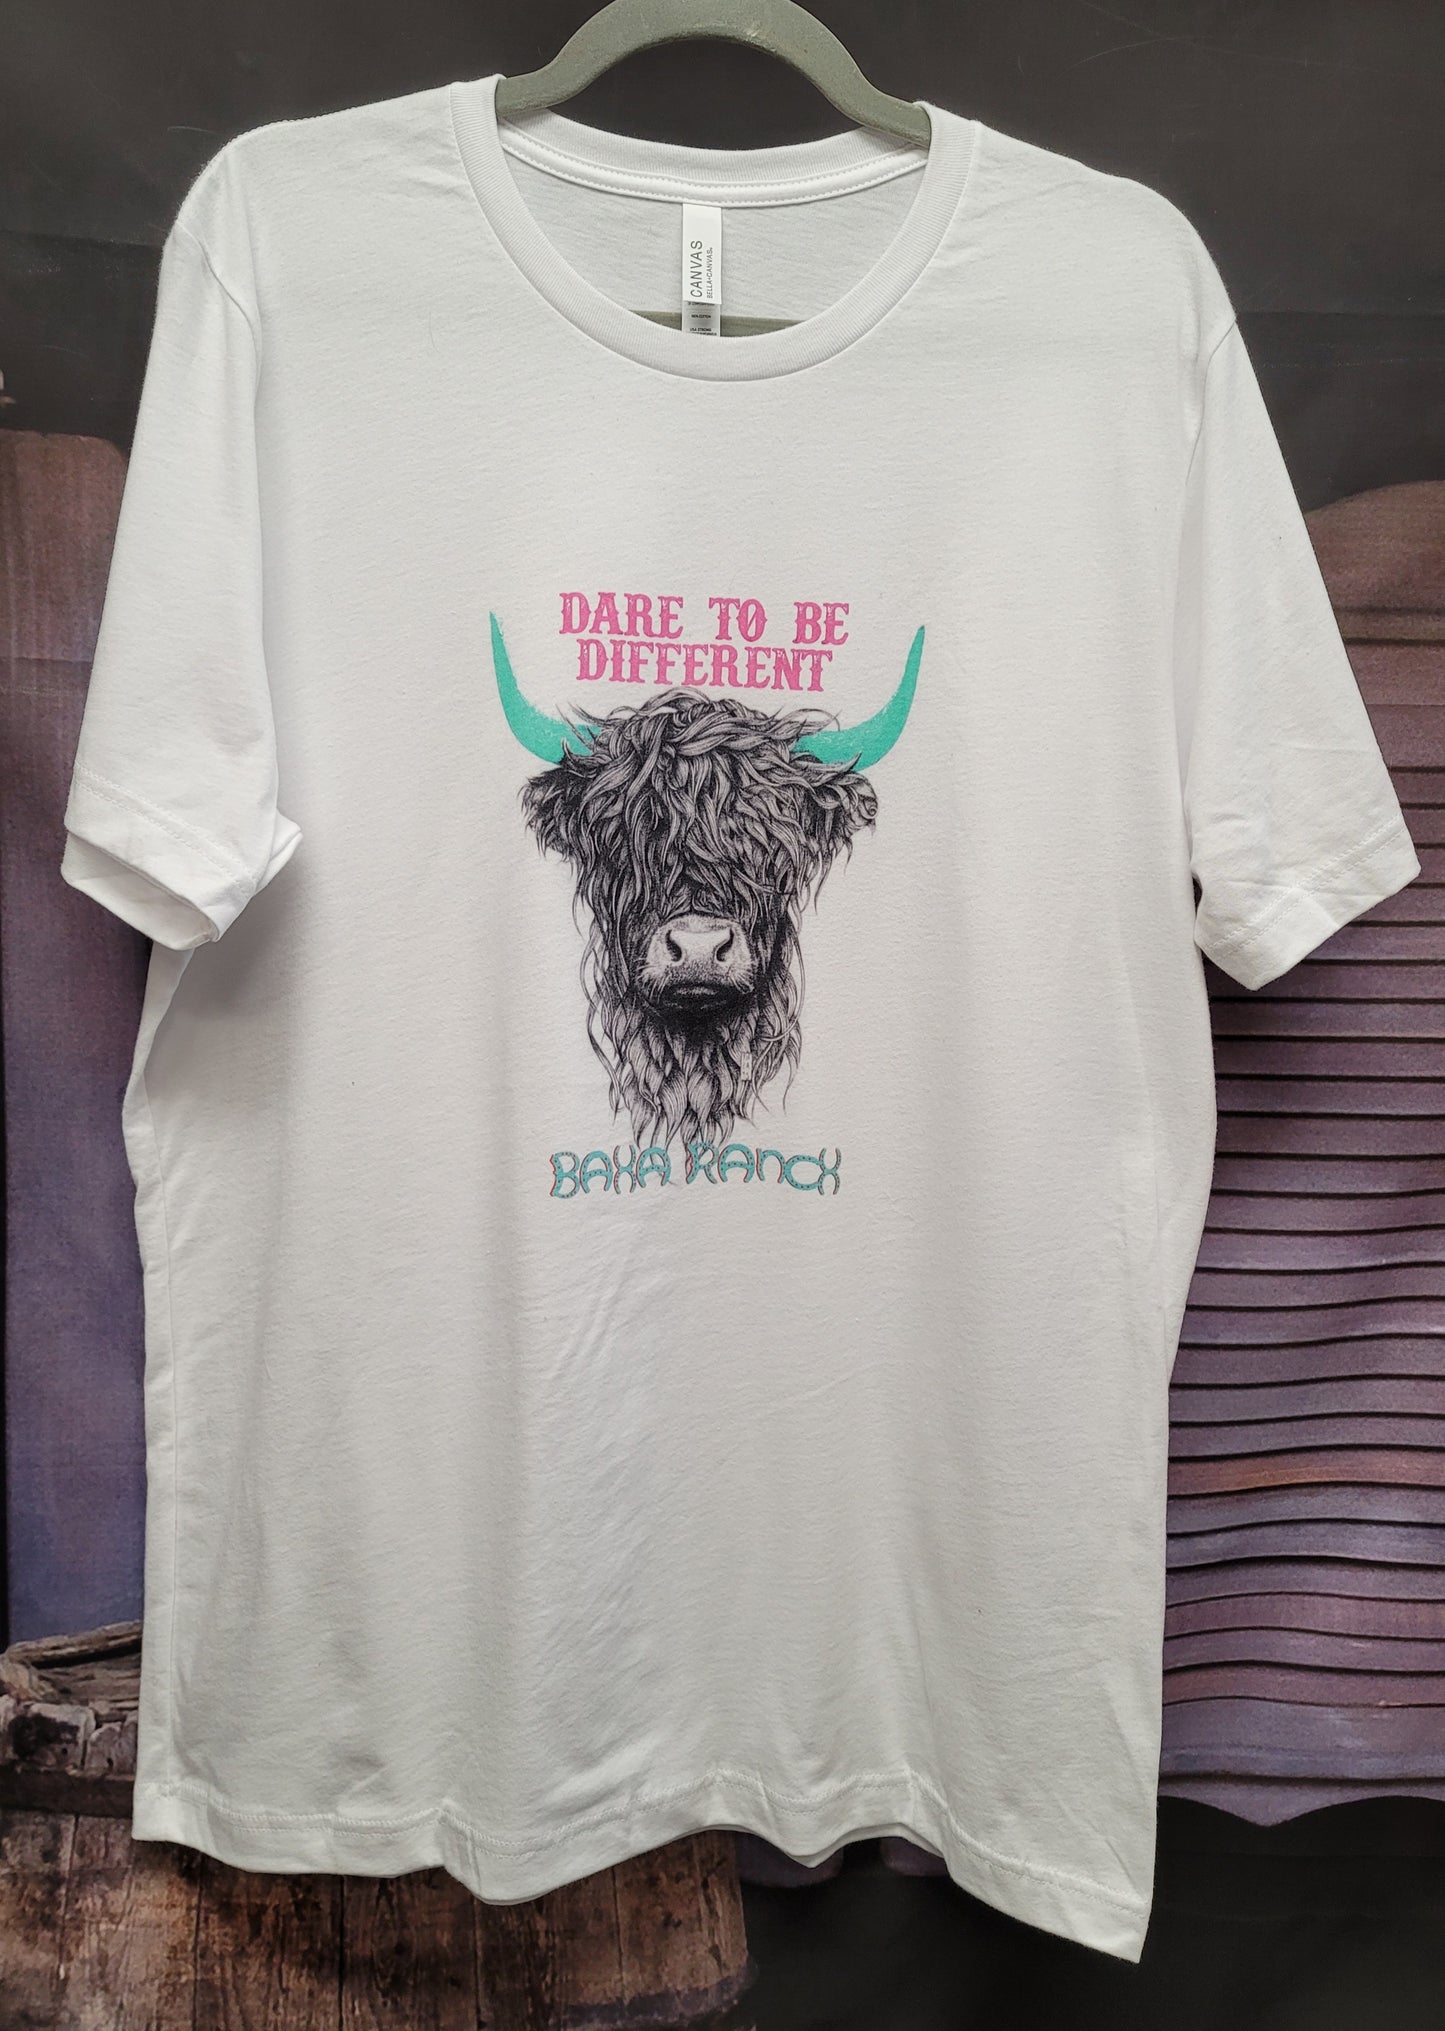 Dare To Be Different Highland Cow Tee - baha ranch, baha ranch logo, dare, dare to be different, graphic tee, high land, high land cow, highland, highland cow, highland cows, highlandbull, highlandcattle, highlandcow, highlandcows, highlander, highlanders, highlands, higland cow, tee, tshirt, unisex, unisex tee -  - Baha Ranch Western Wear